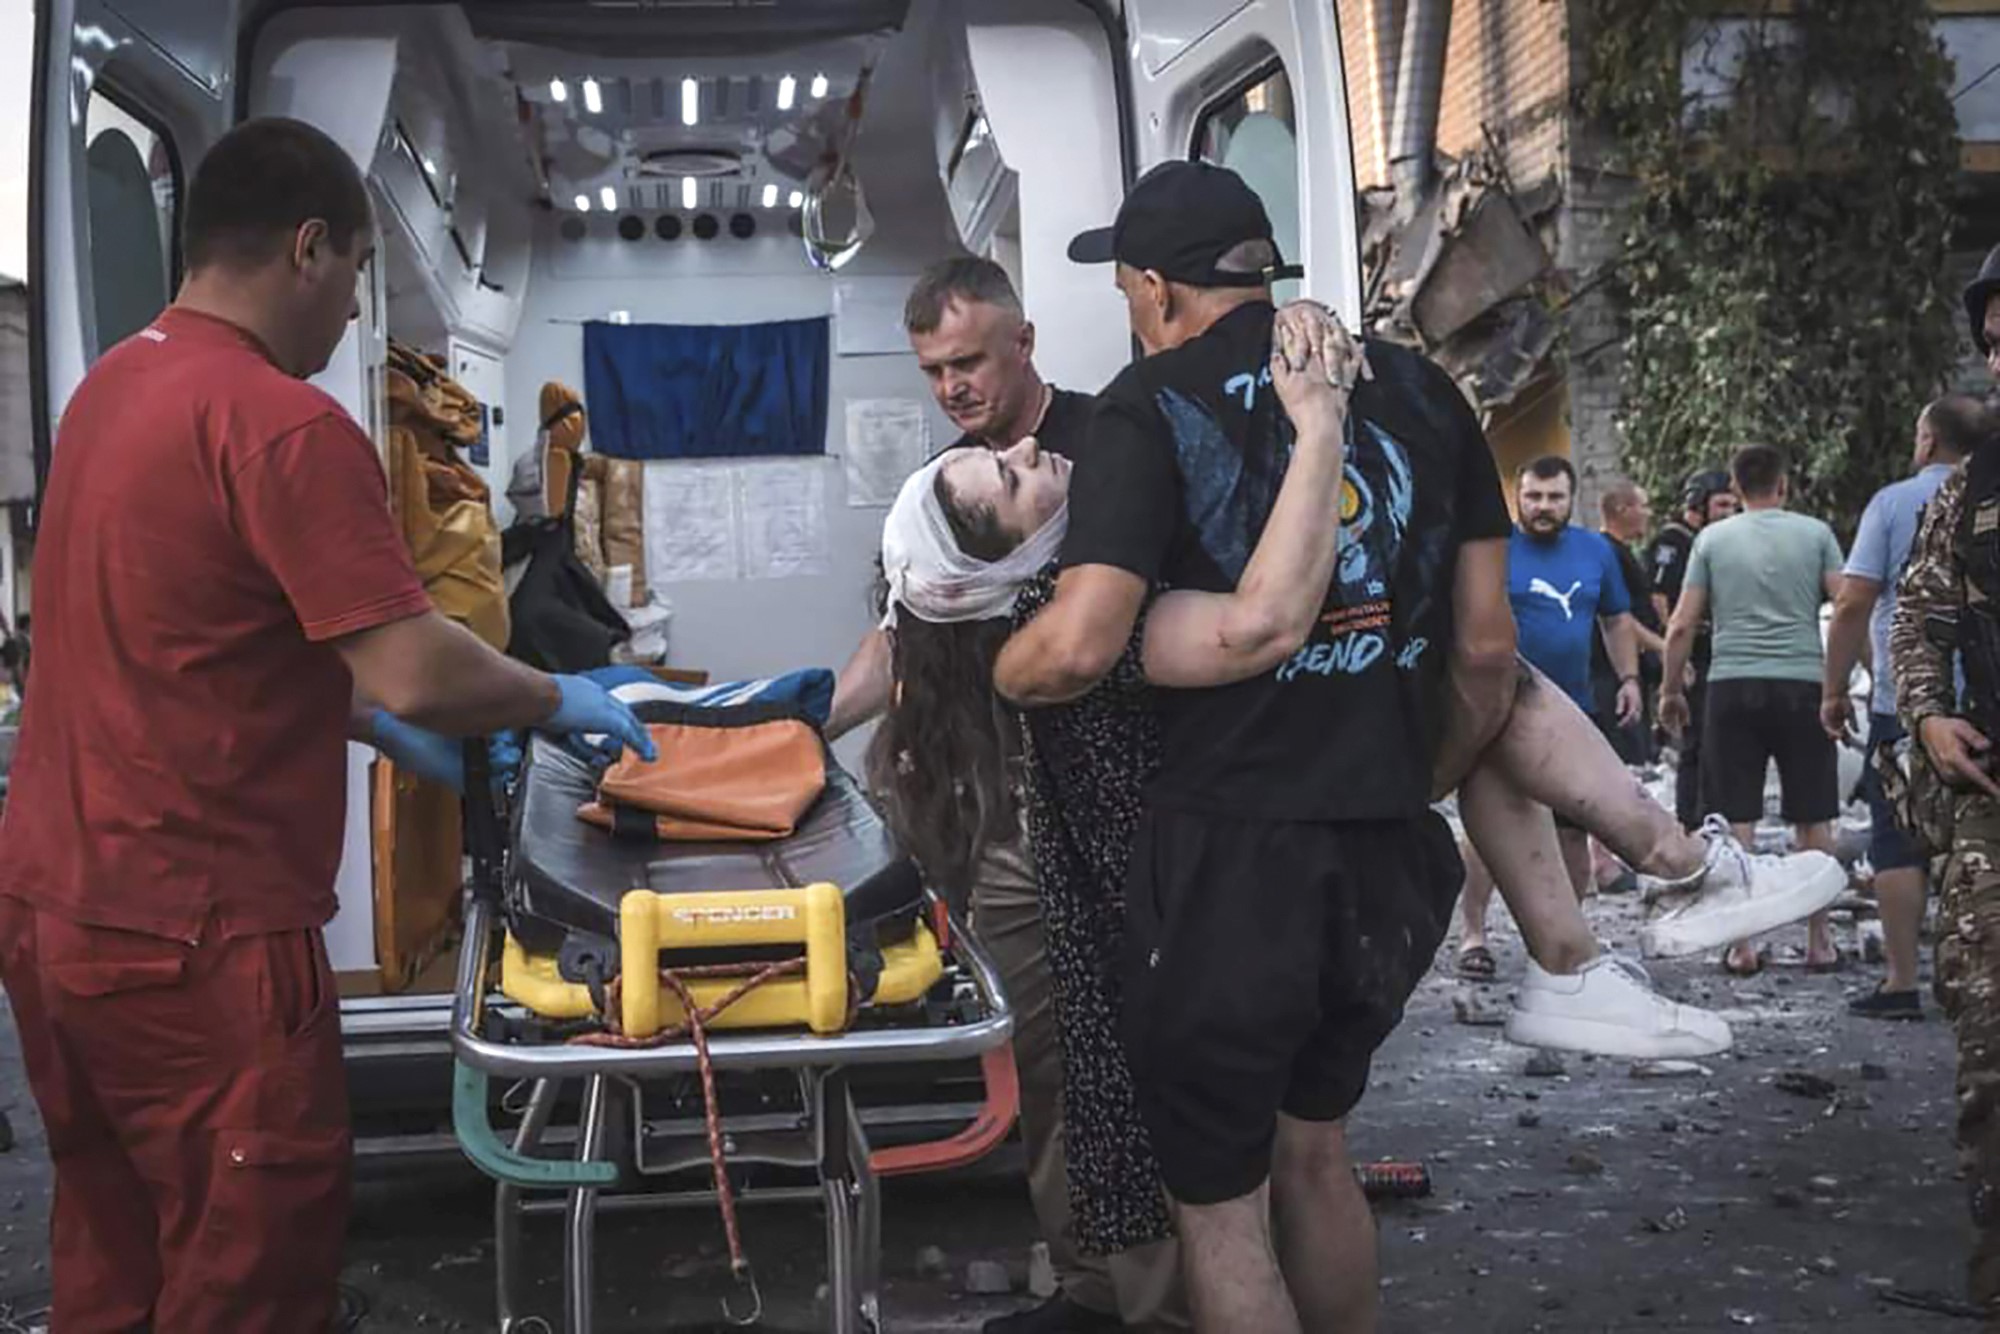 A man carrying a woman and placing her in a stretcher in a small ambulance, as emergency workers and volunteers work around them